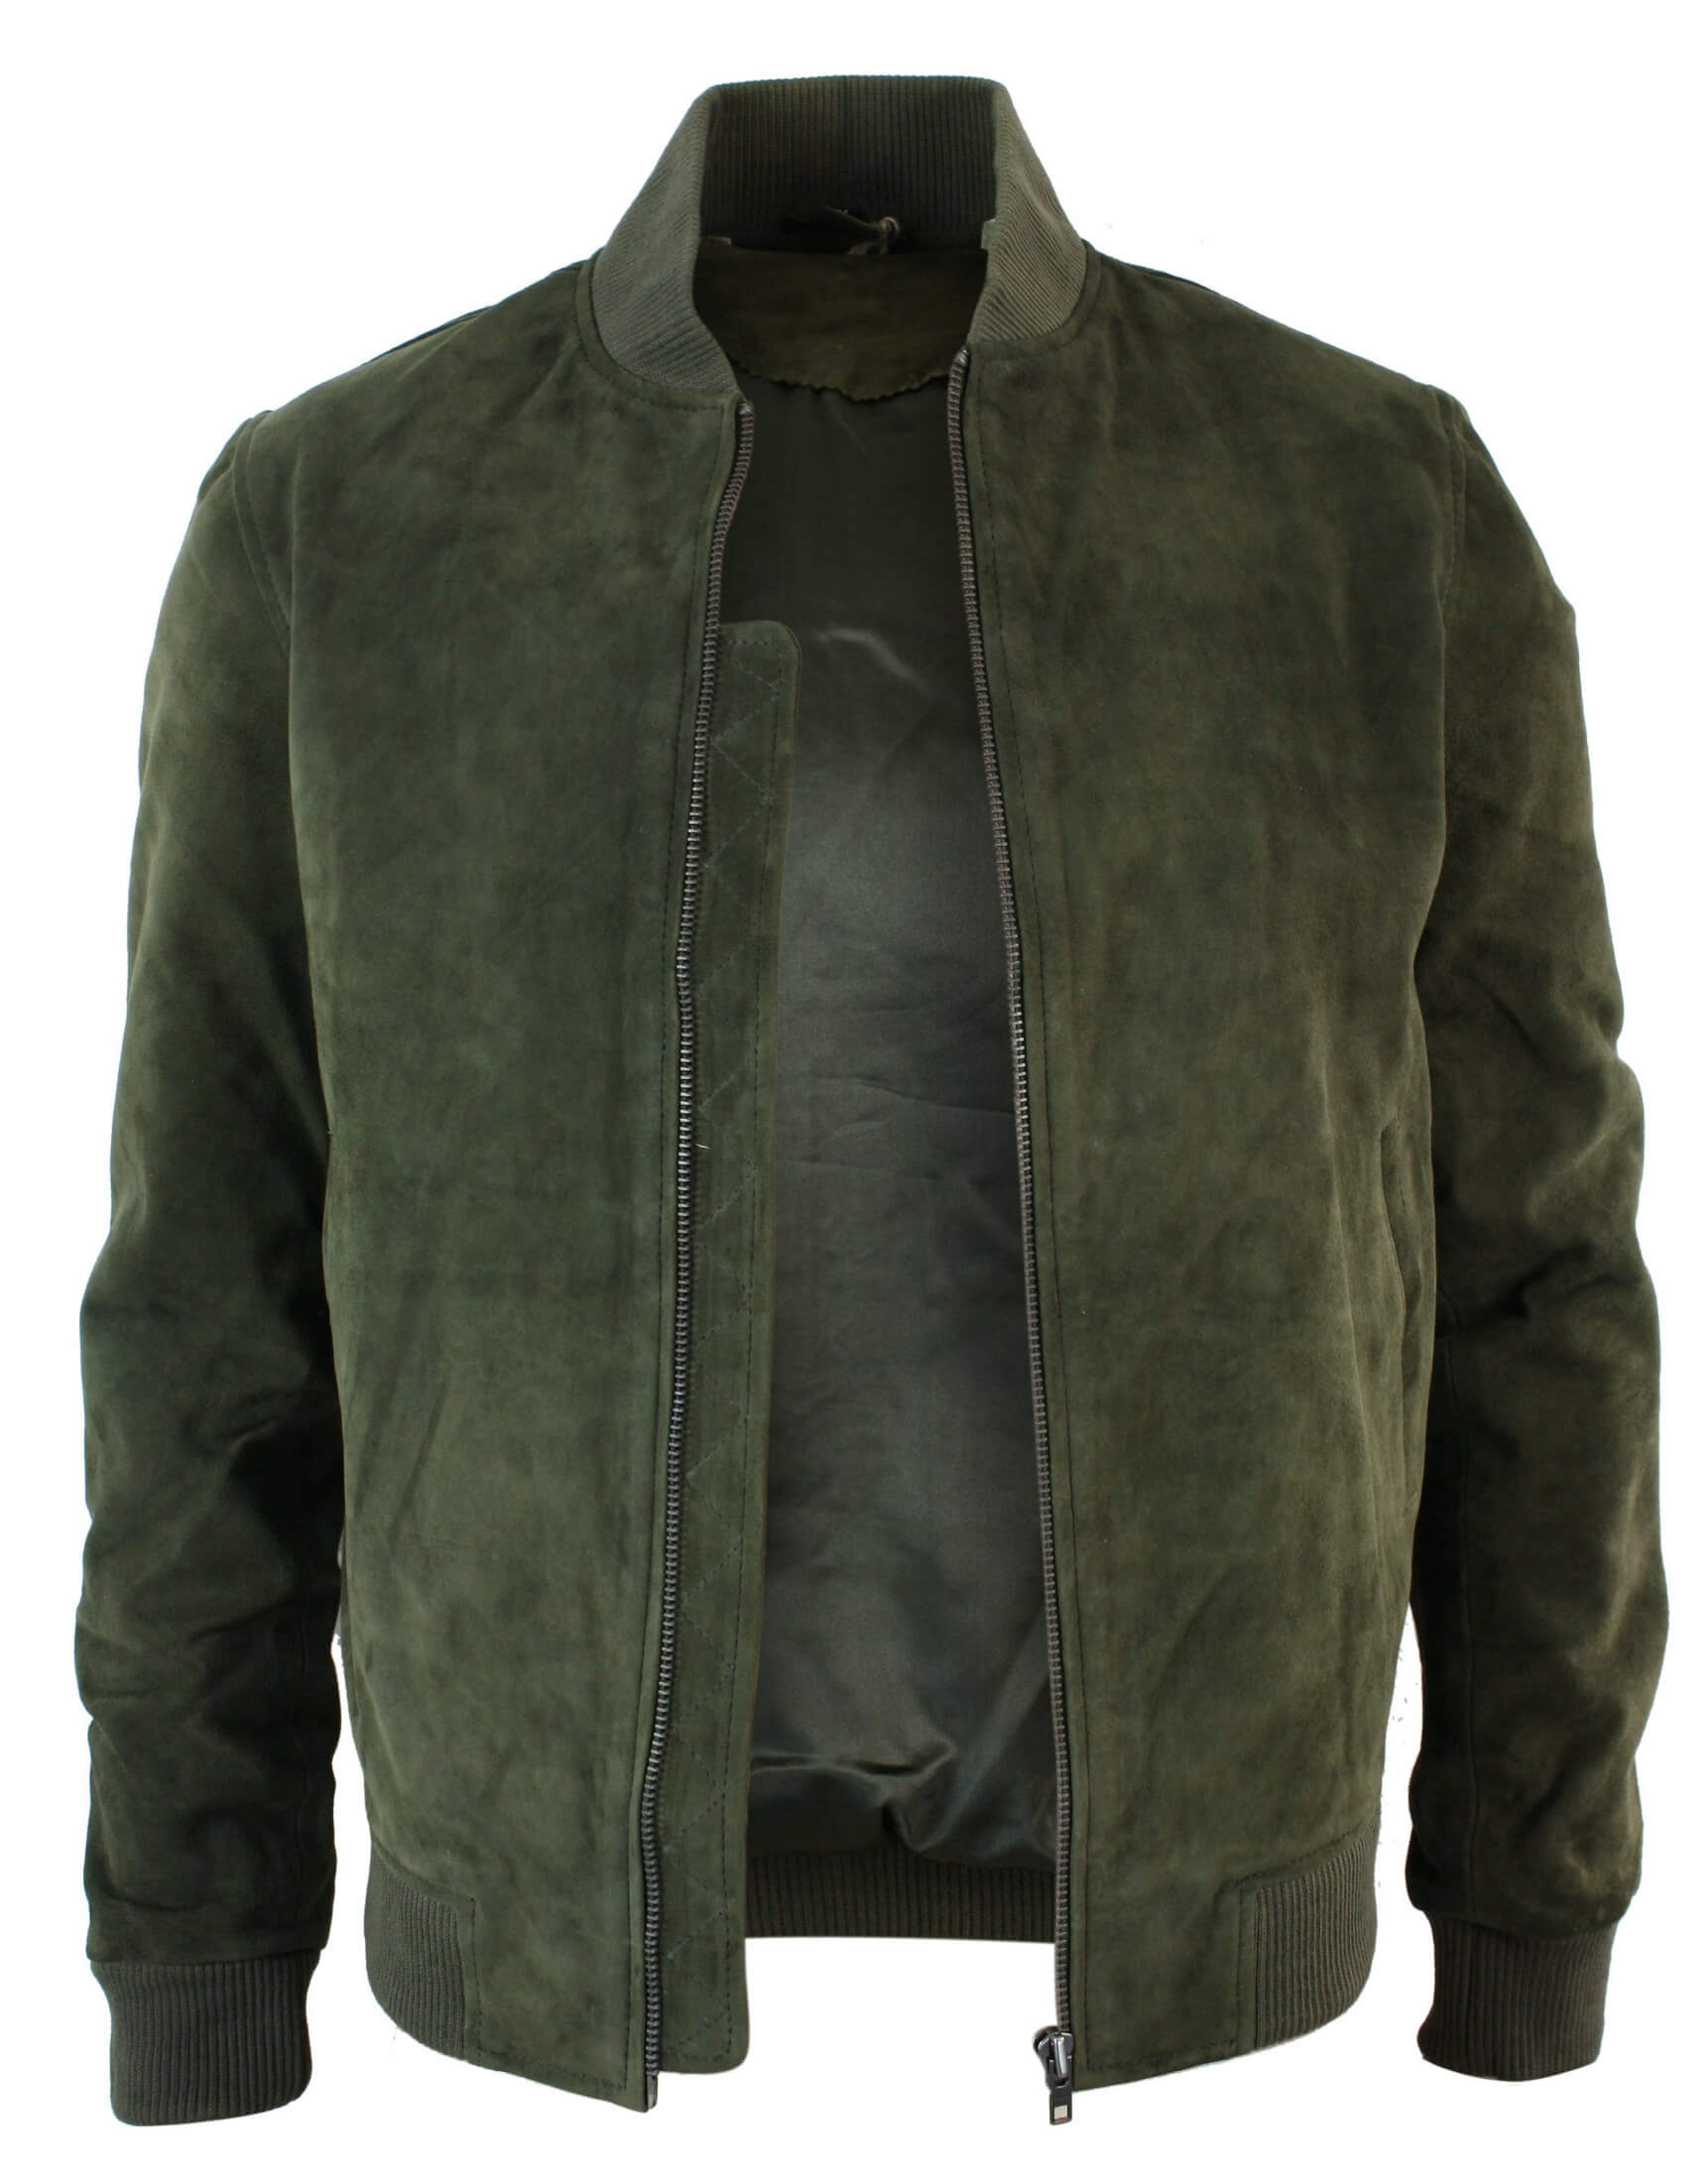 Try These Men's Green Leather Jacket Outfits For an Elevated Look - Leather  Skin Shop